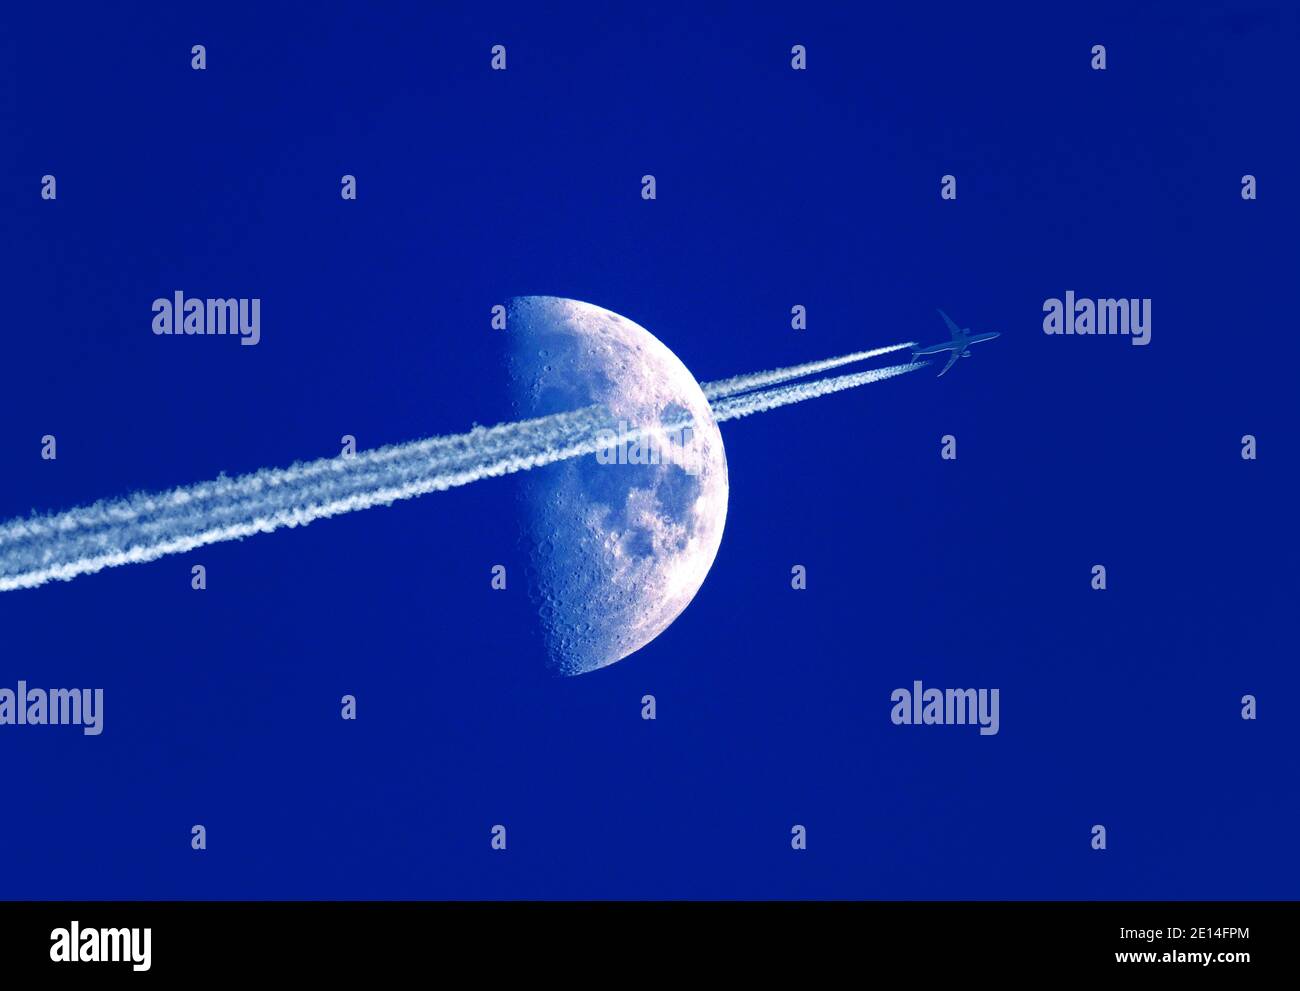 High flying jet aircraft with contrails passing in front of a half moon at dusk Stock Photo